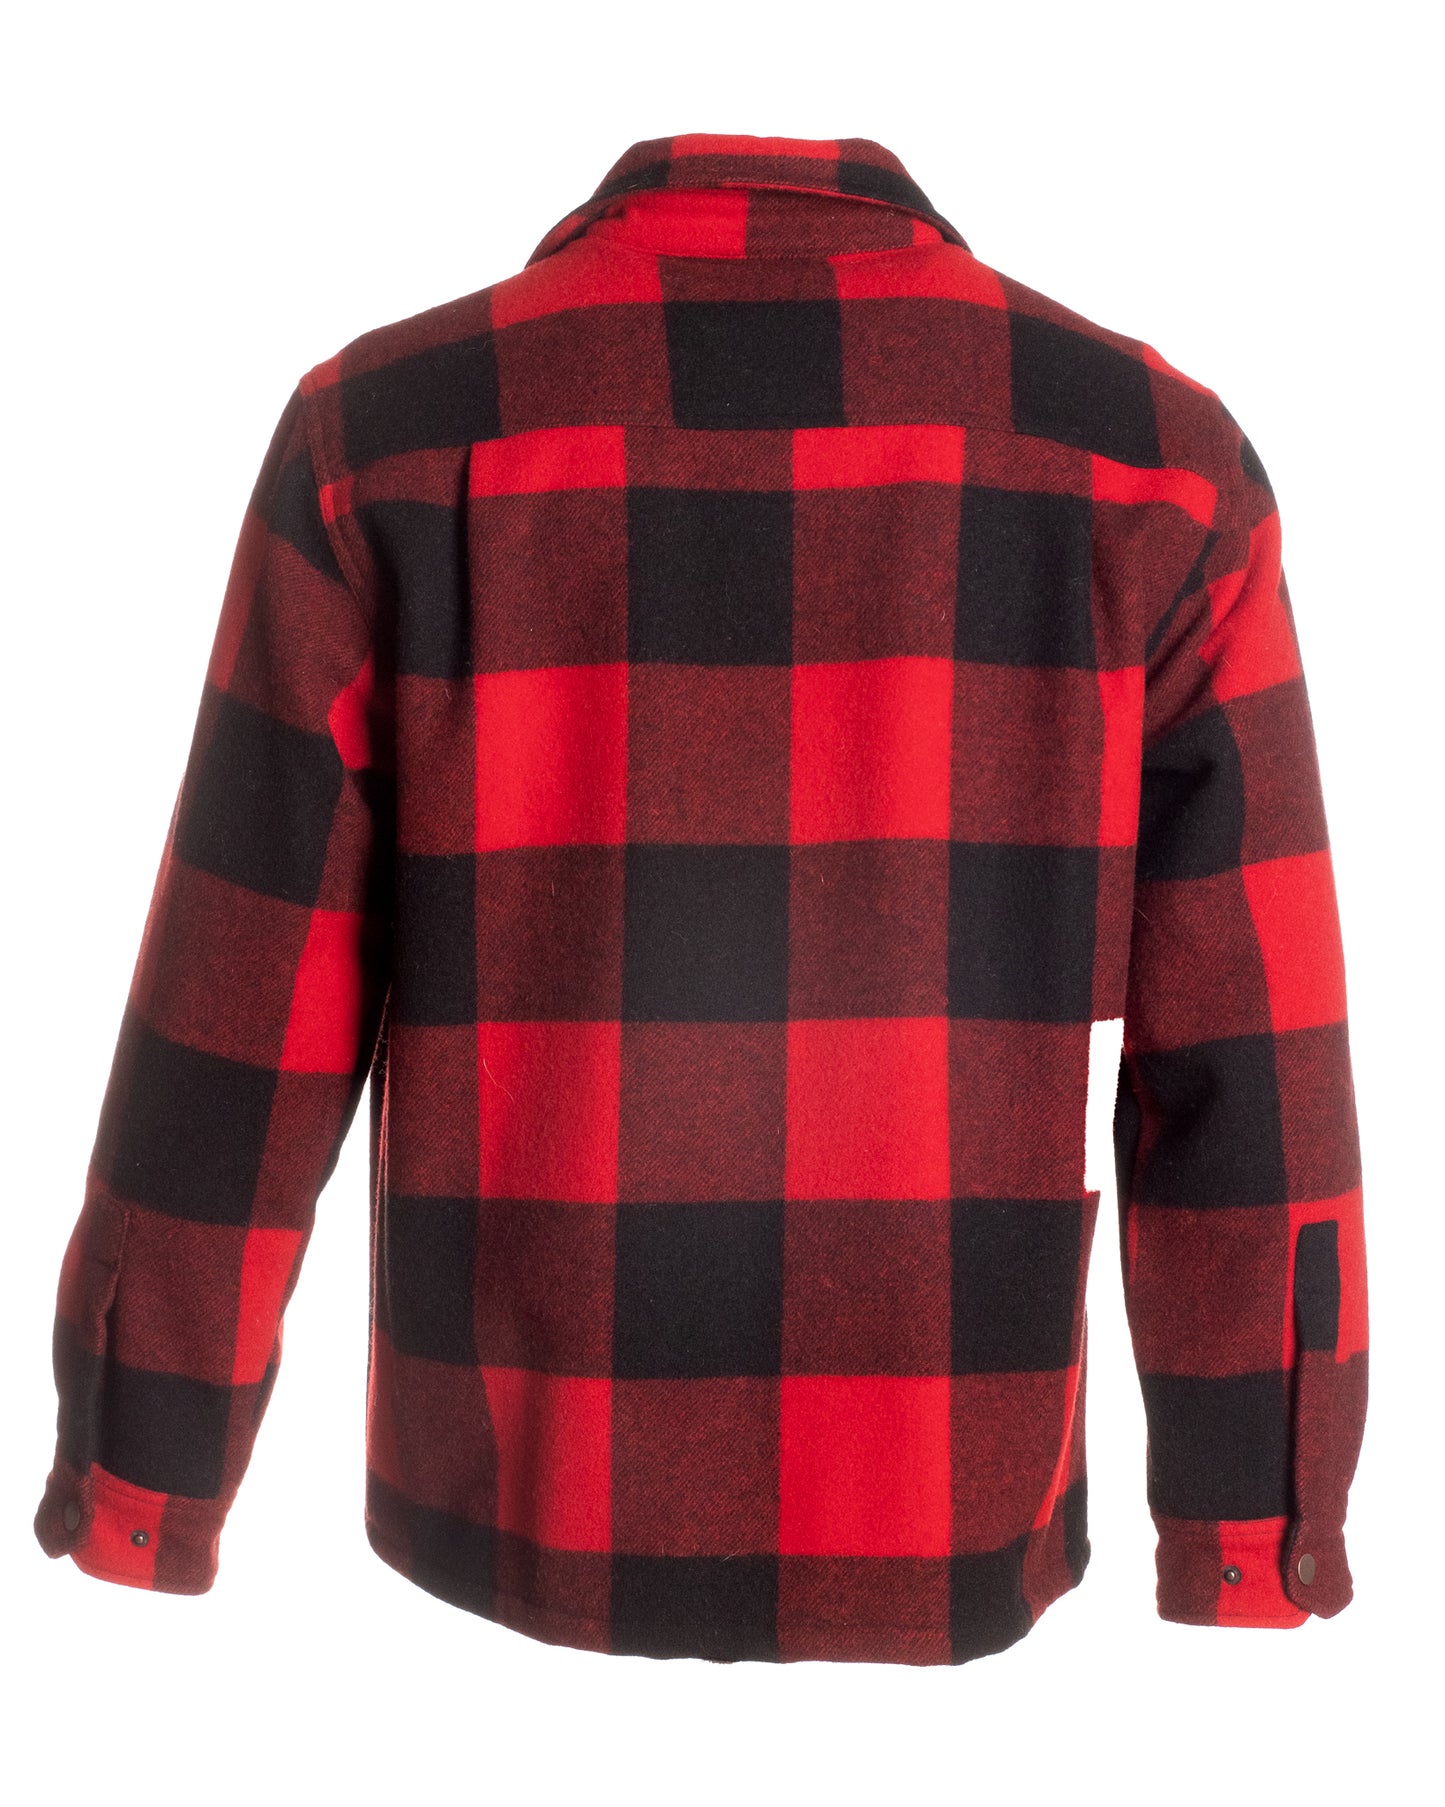 Sherpa Lined Shirtjac Woolly Dry Goods